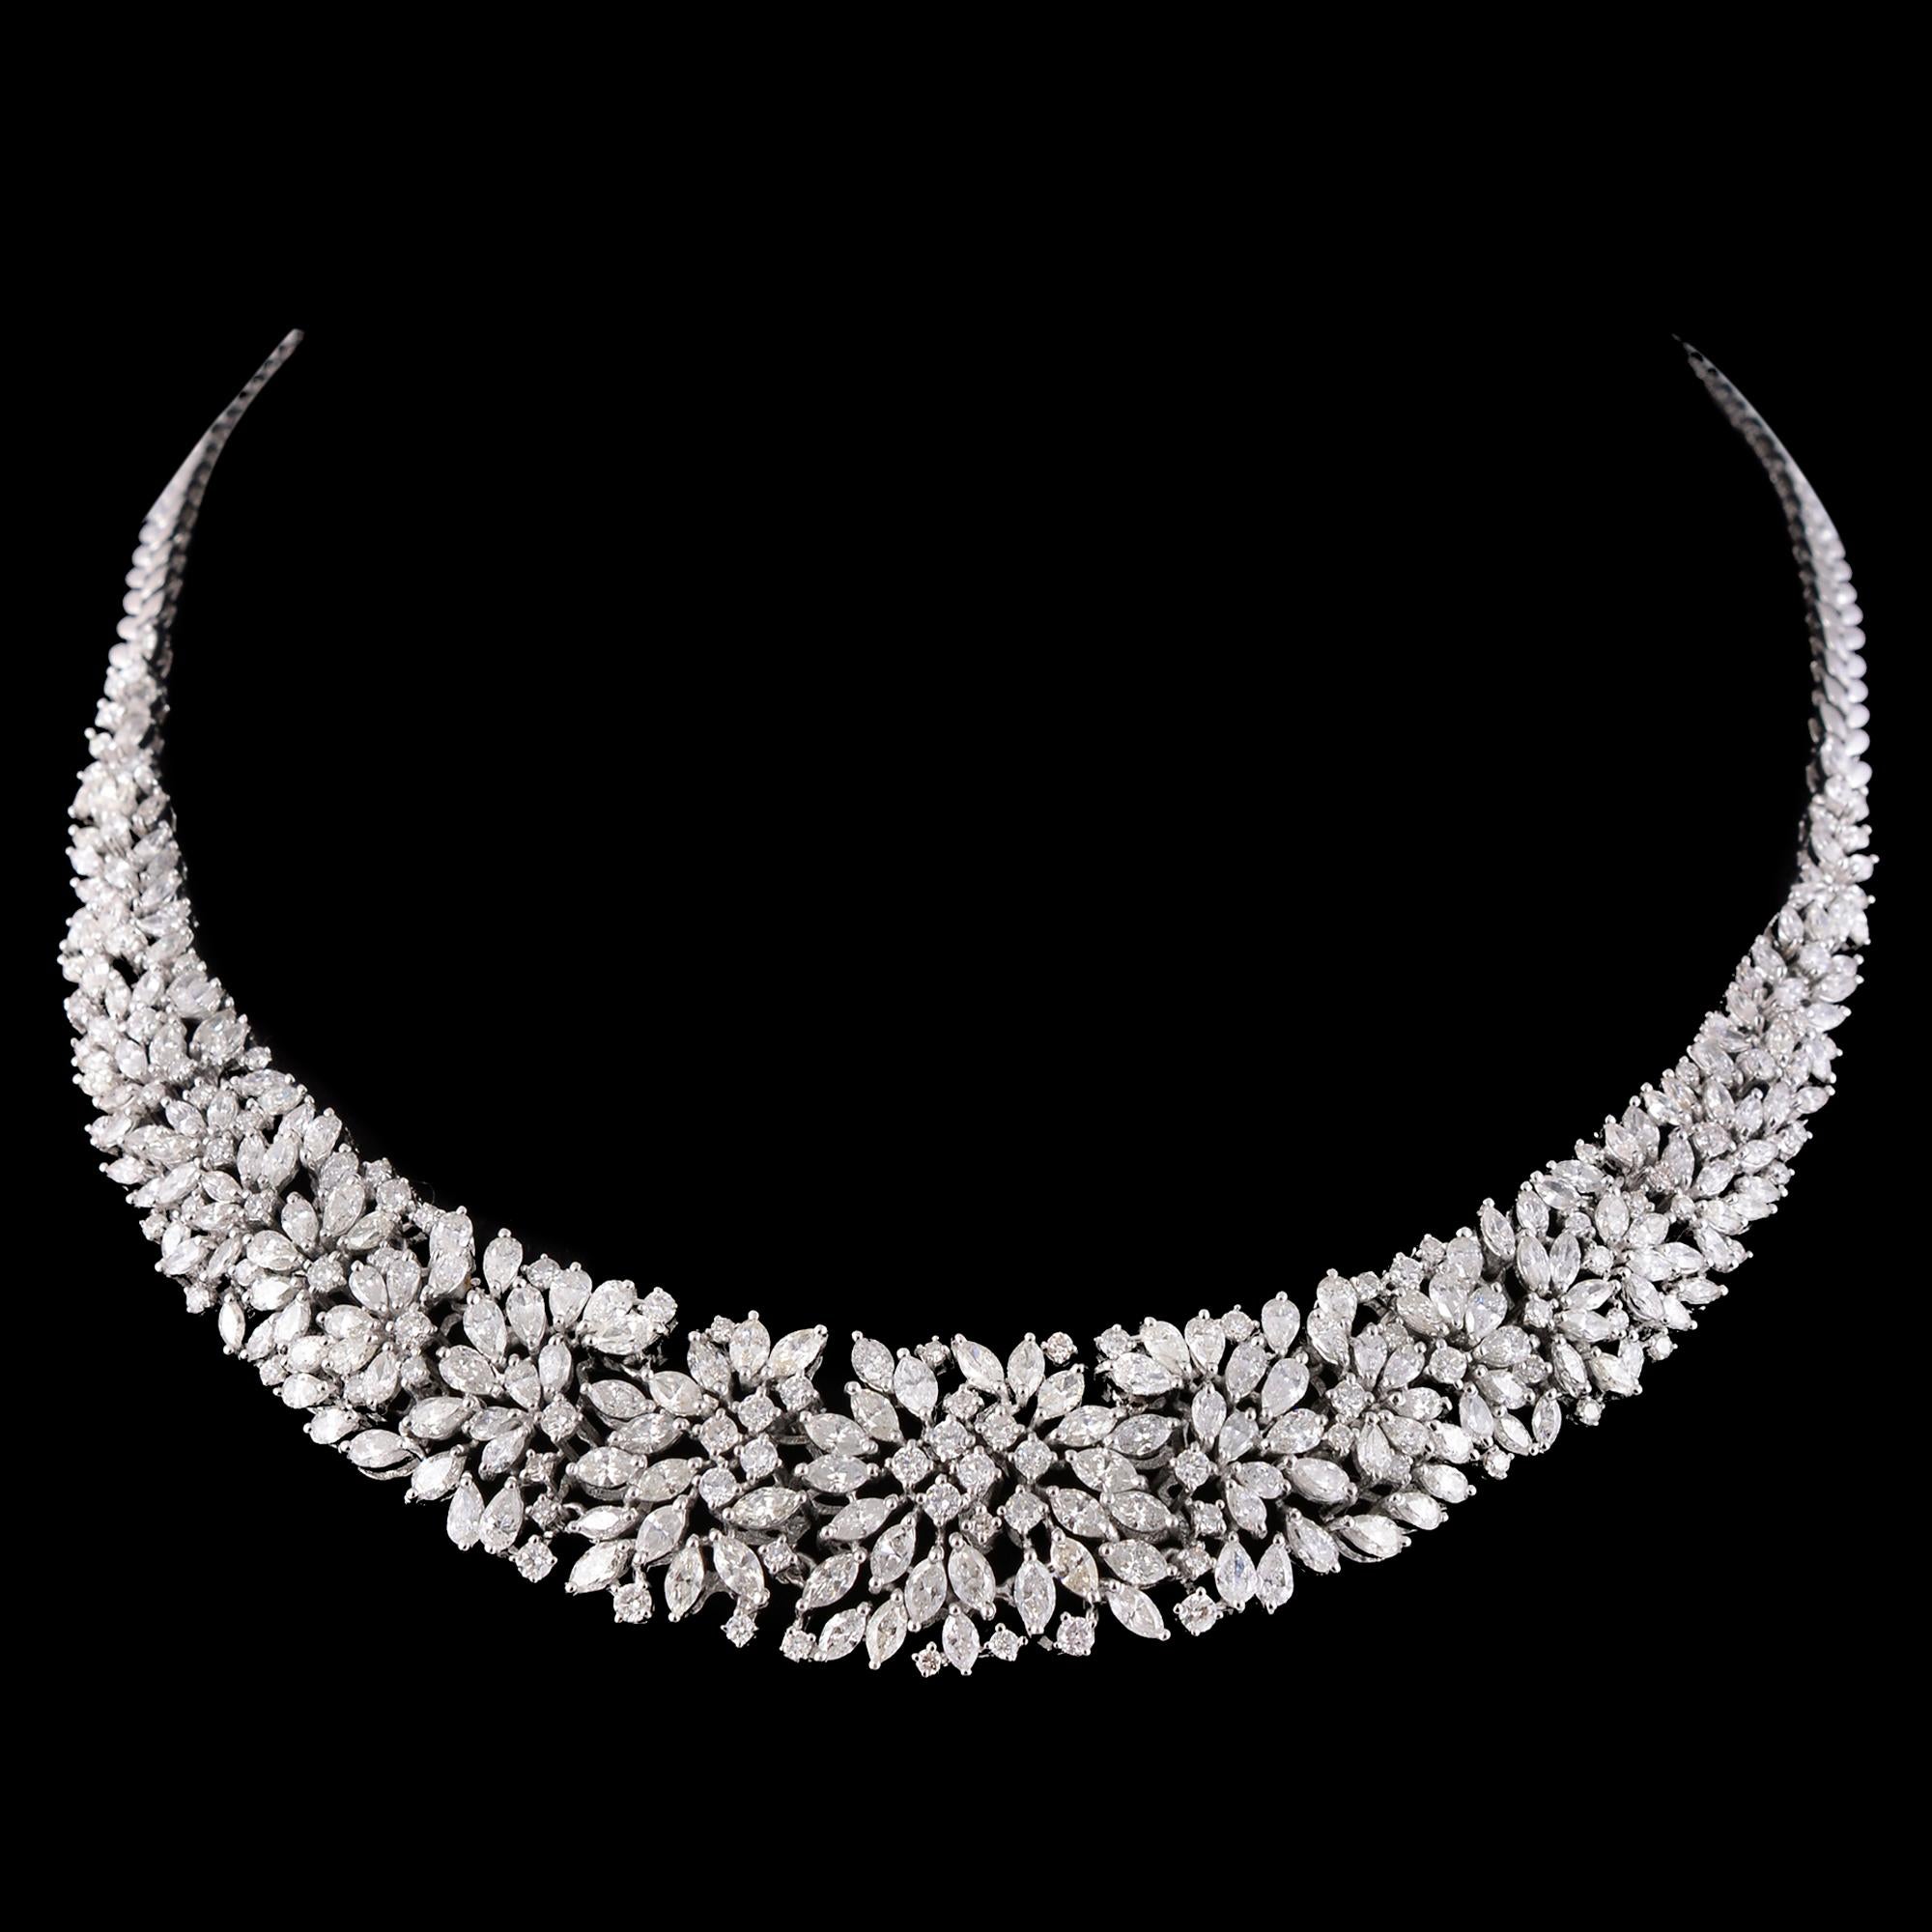 Modern 16.10 Ct. SI/HI Pear Marquise Round Diamond Necklace 18 Karat White Gold Jewelry For Sale